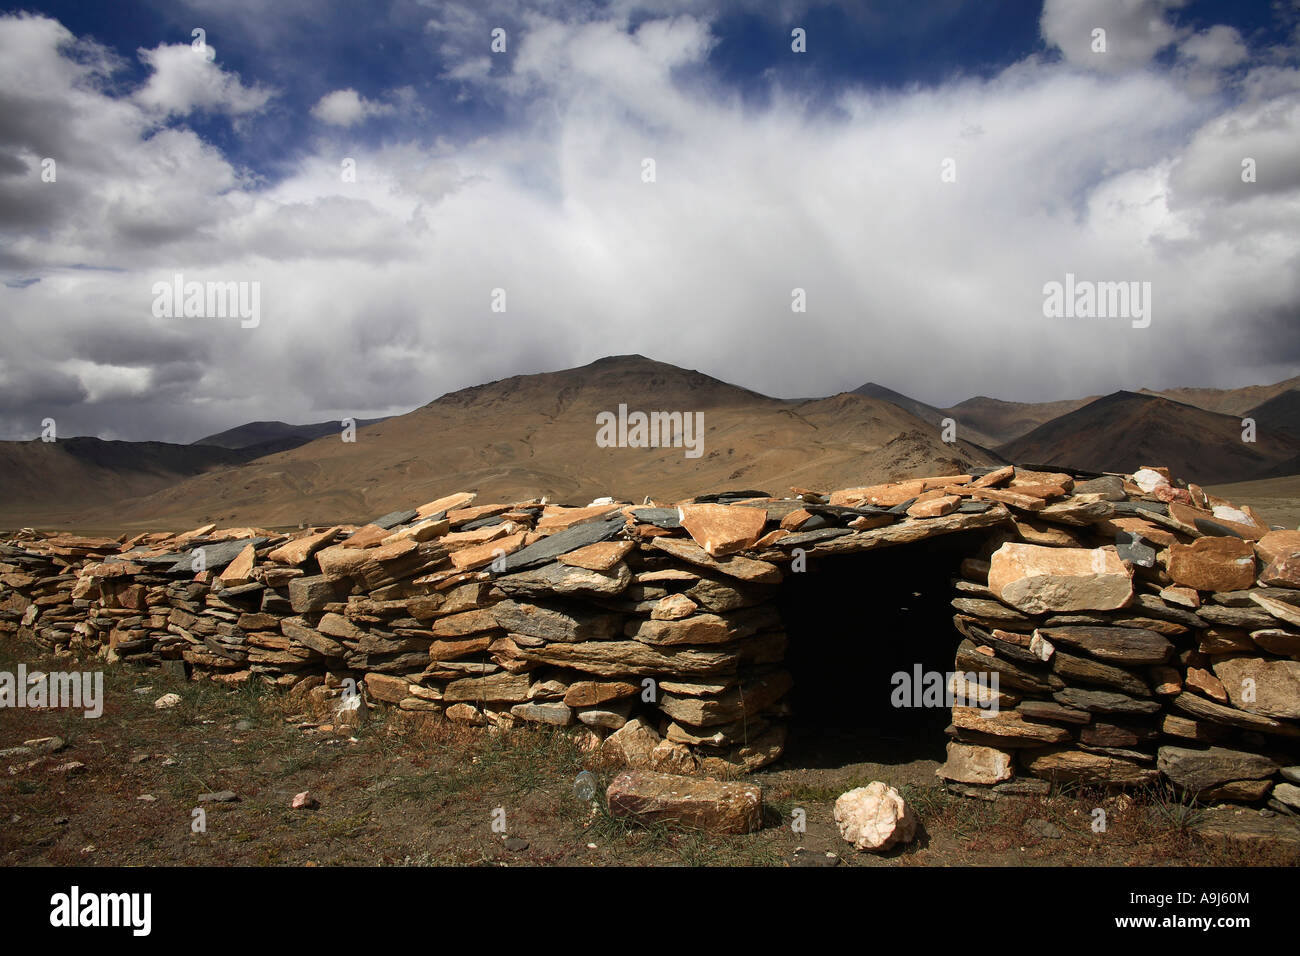 A temporary shelter built by nomads at Rupsu plateau, Himachal pradesh, India Stock Photo